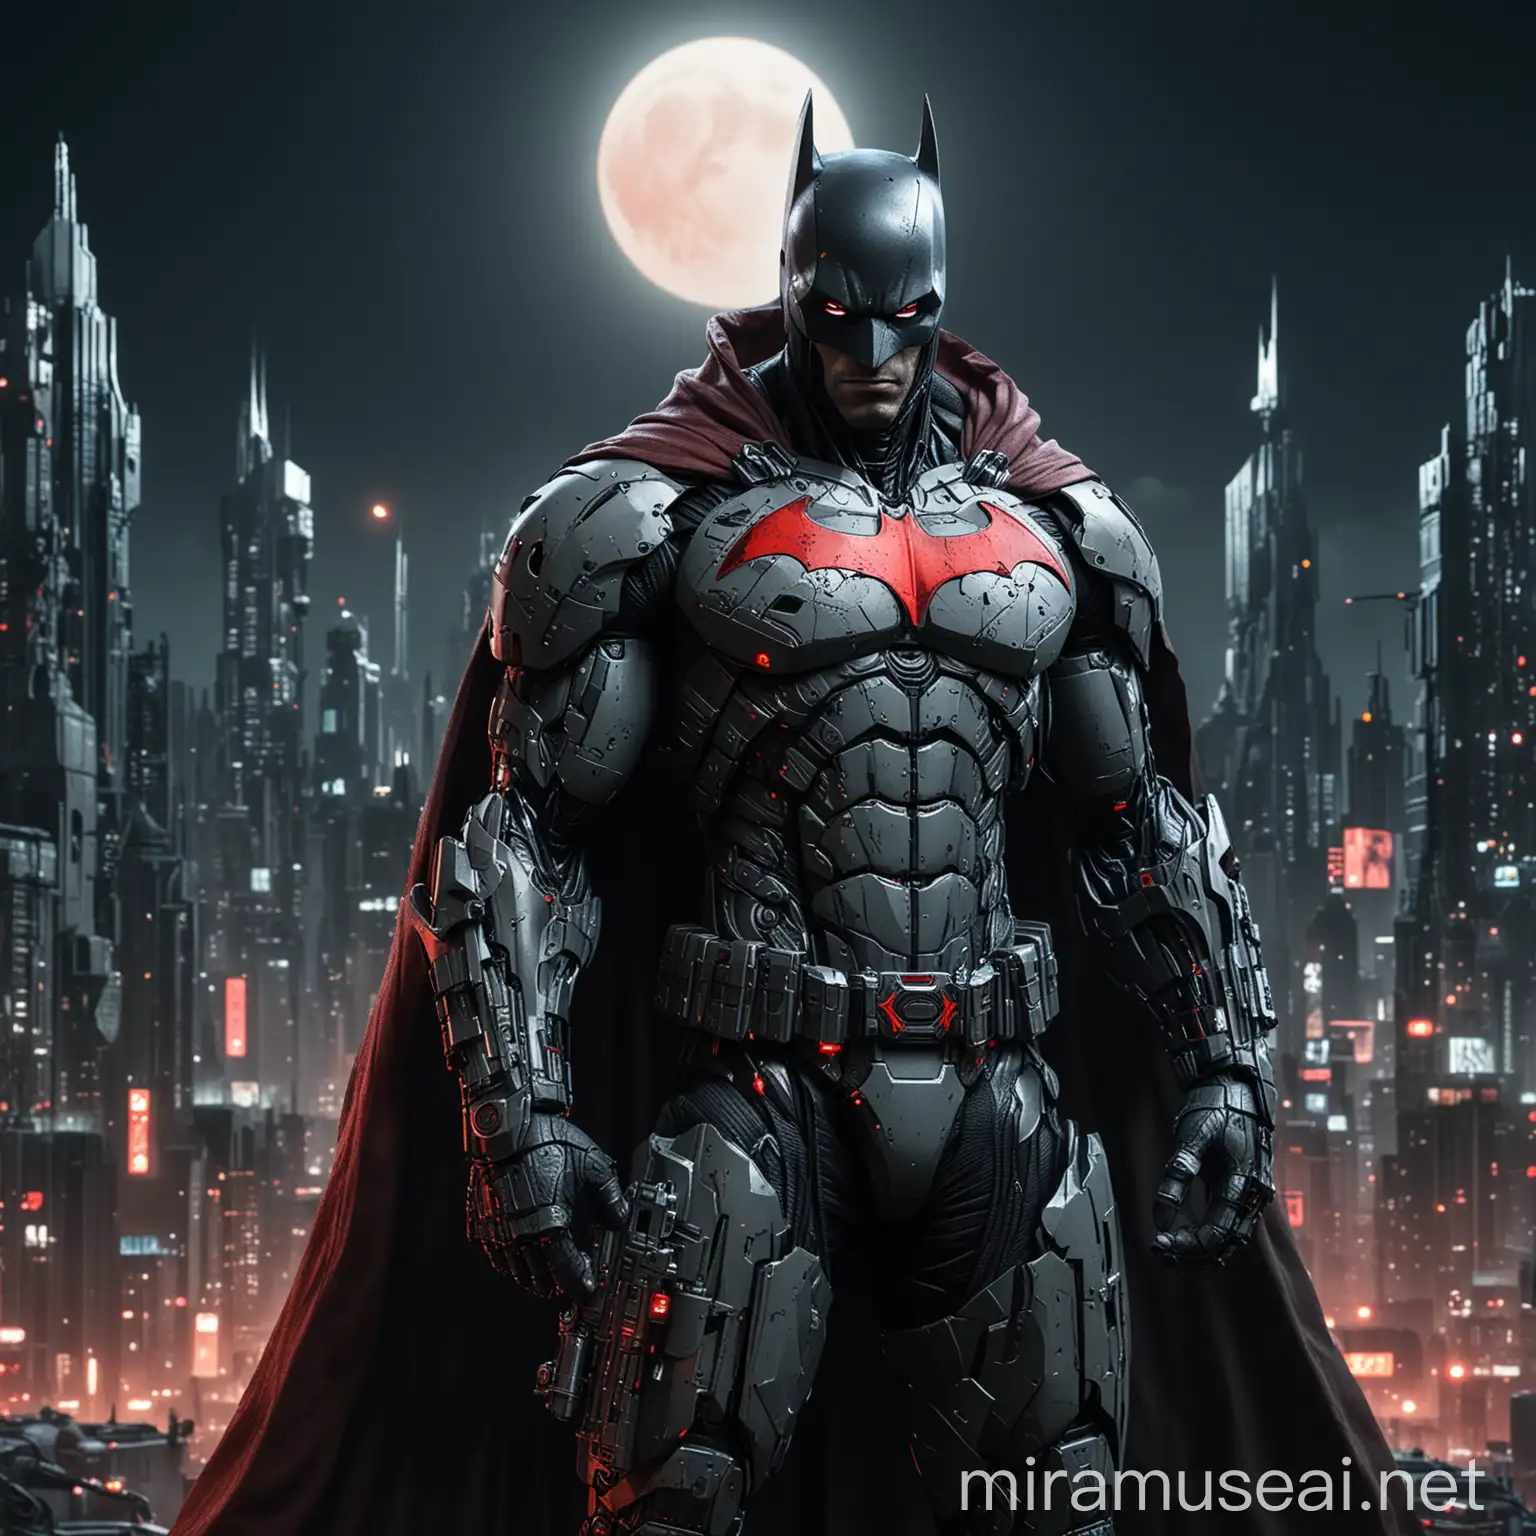 Cyborg batman with the Cape and hood , cyberpunk , cybernetic gun on left hand , extremely detailed , intricate , sharp lines , full body shot , night Gotham city background , red moon